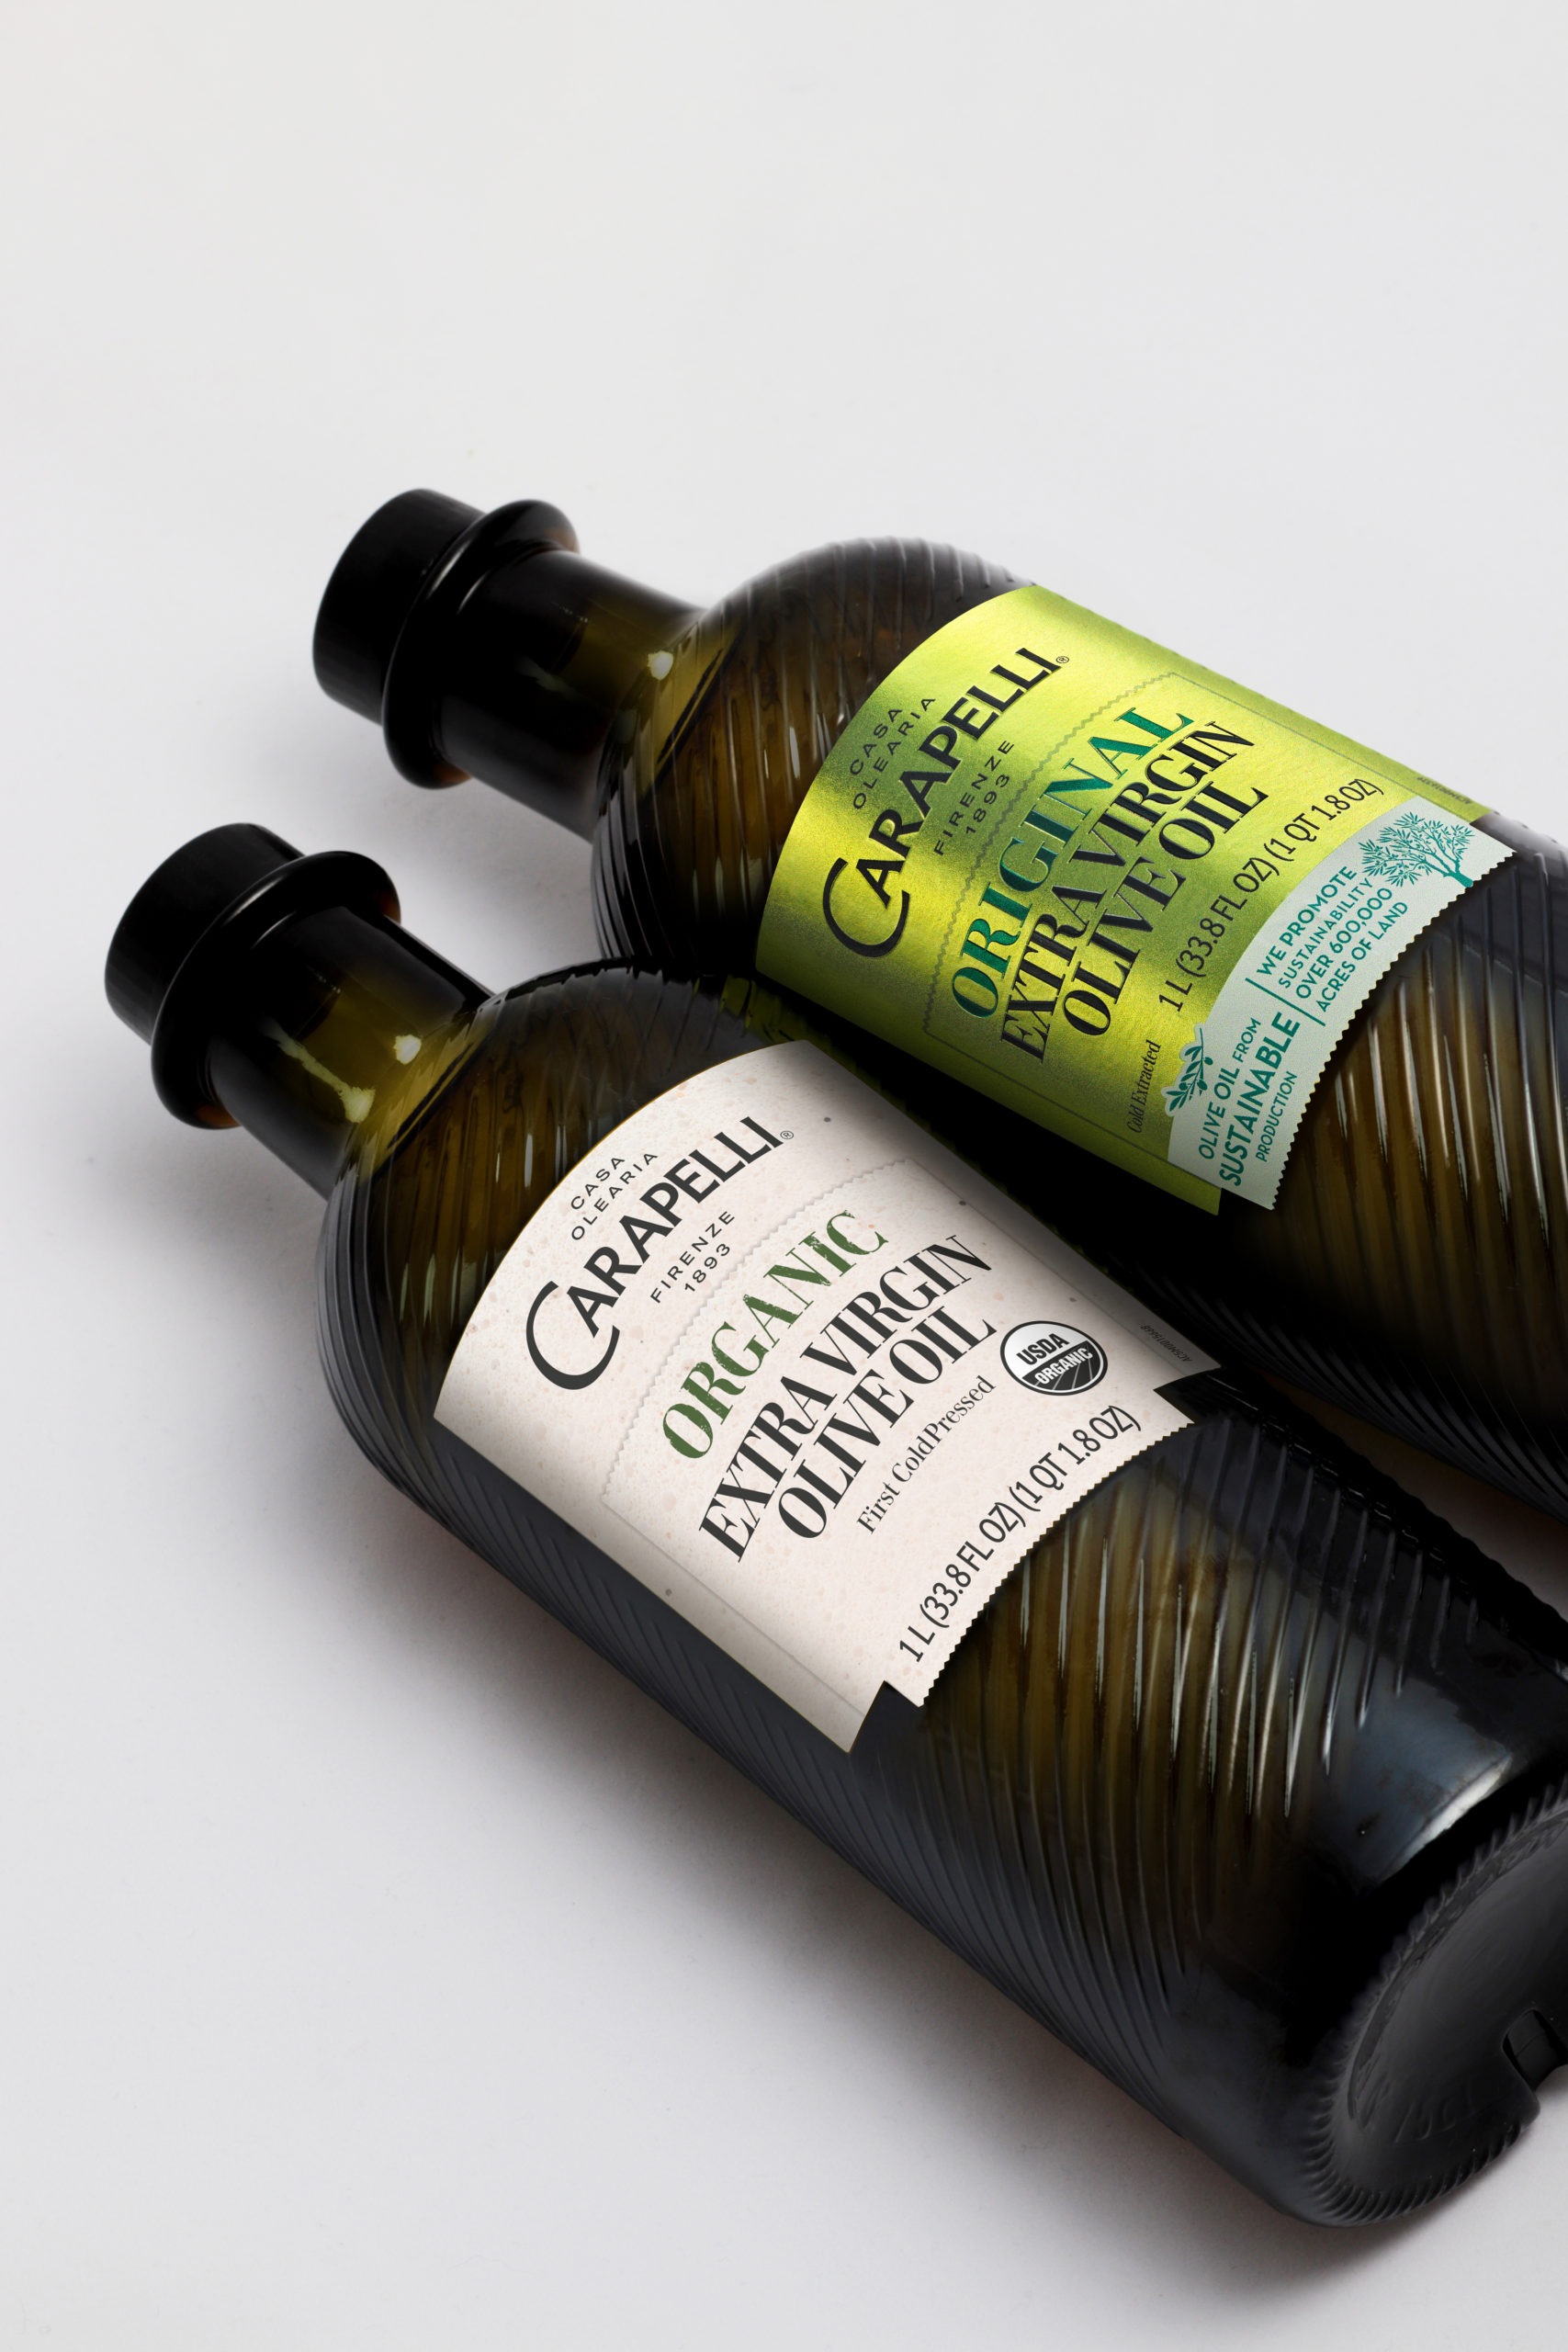 Carapelli: centuries in the world of Extra Virgin olive oil